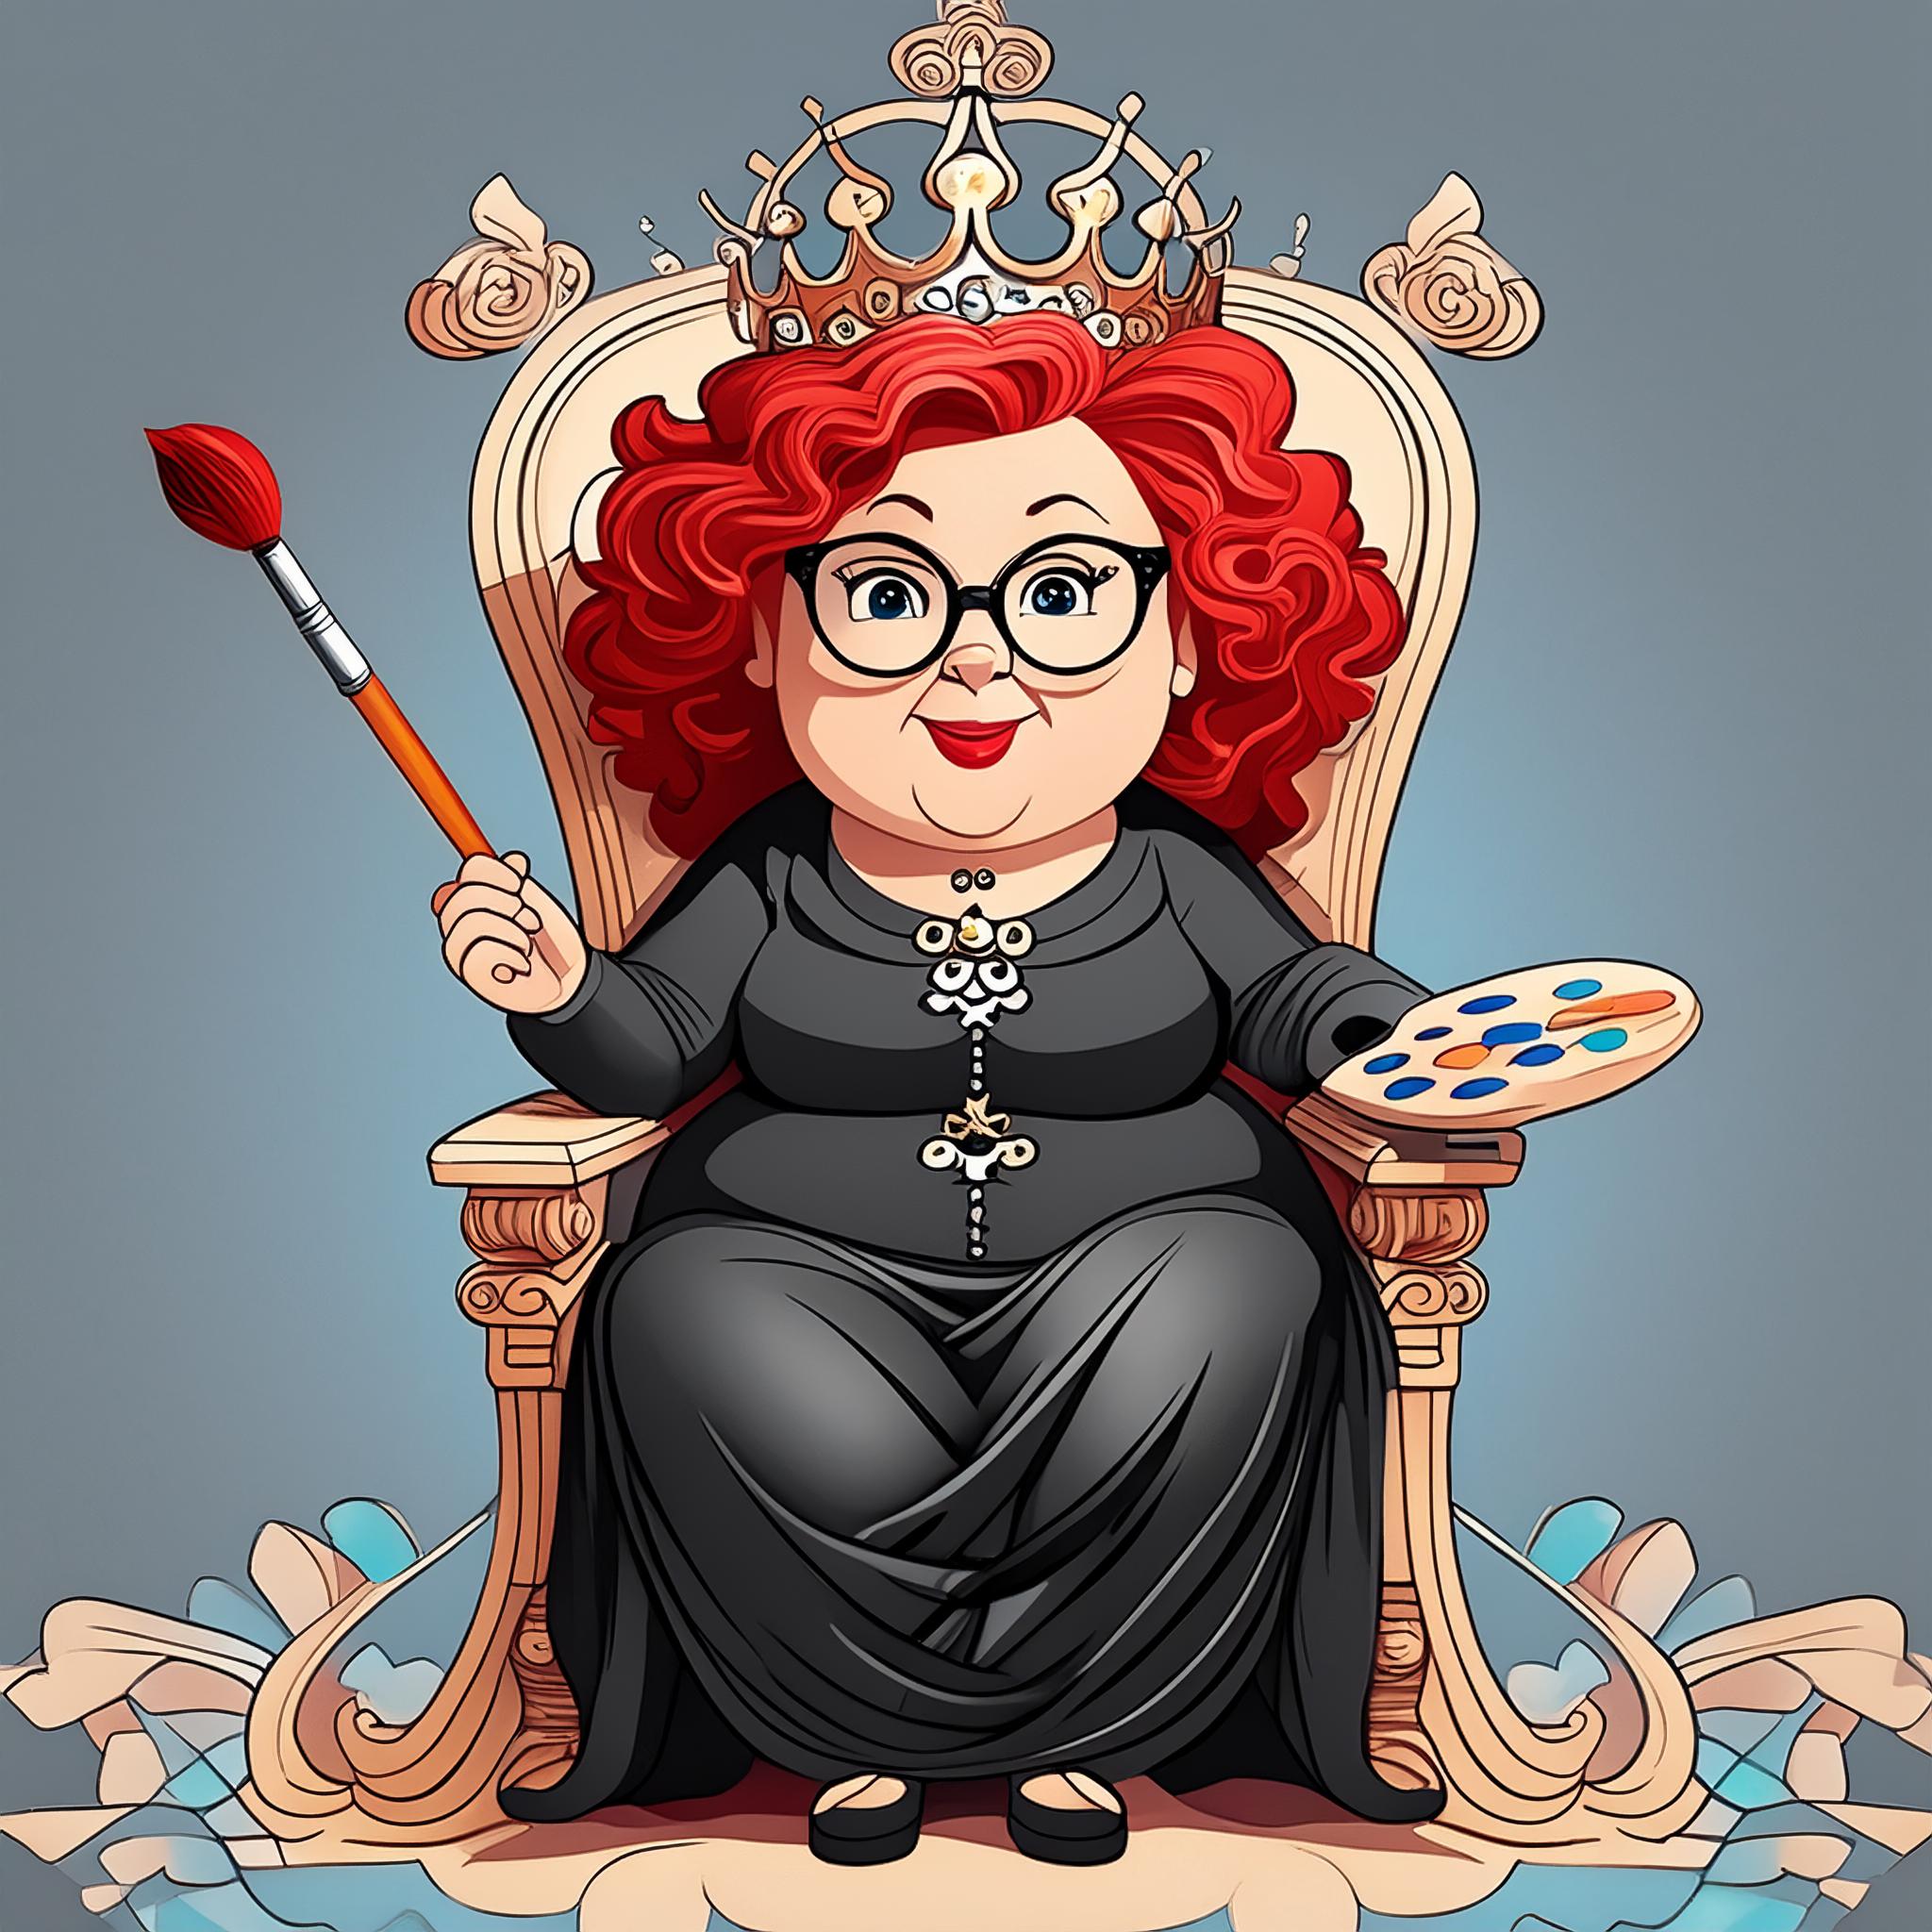 A cartoon of a red headed woman in a black dress sitting on a crown holding a paint brush and pallet.